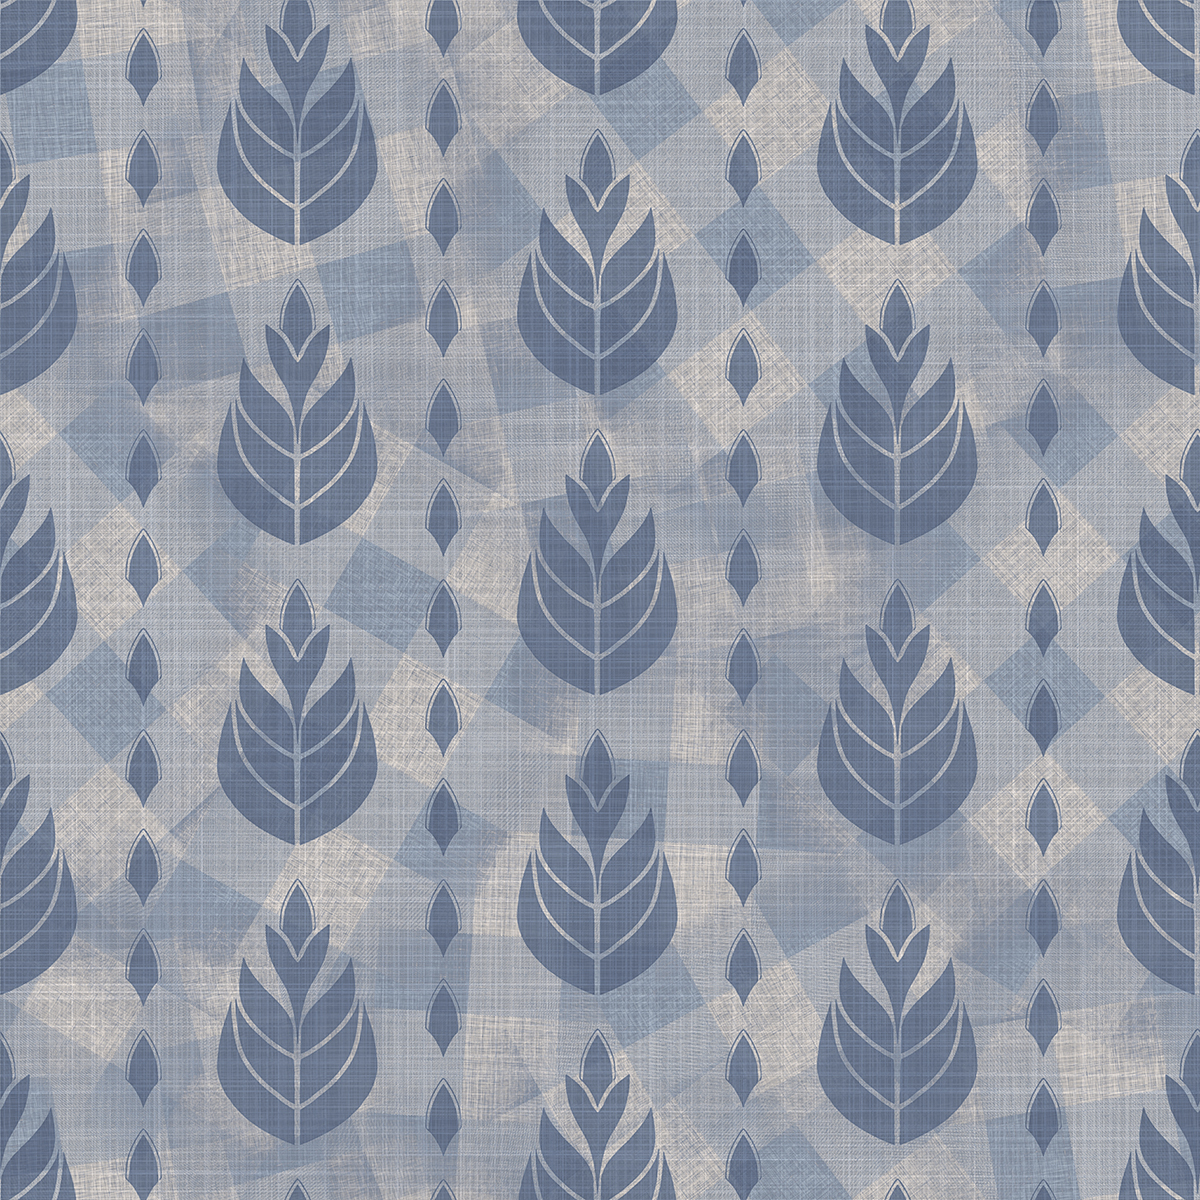 A blue and white fabric with leaves